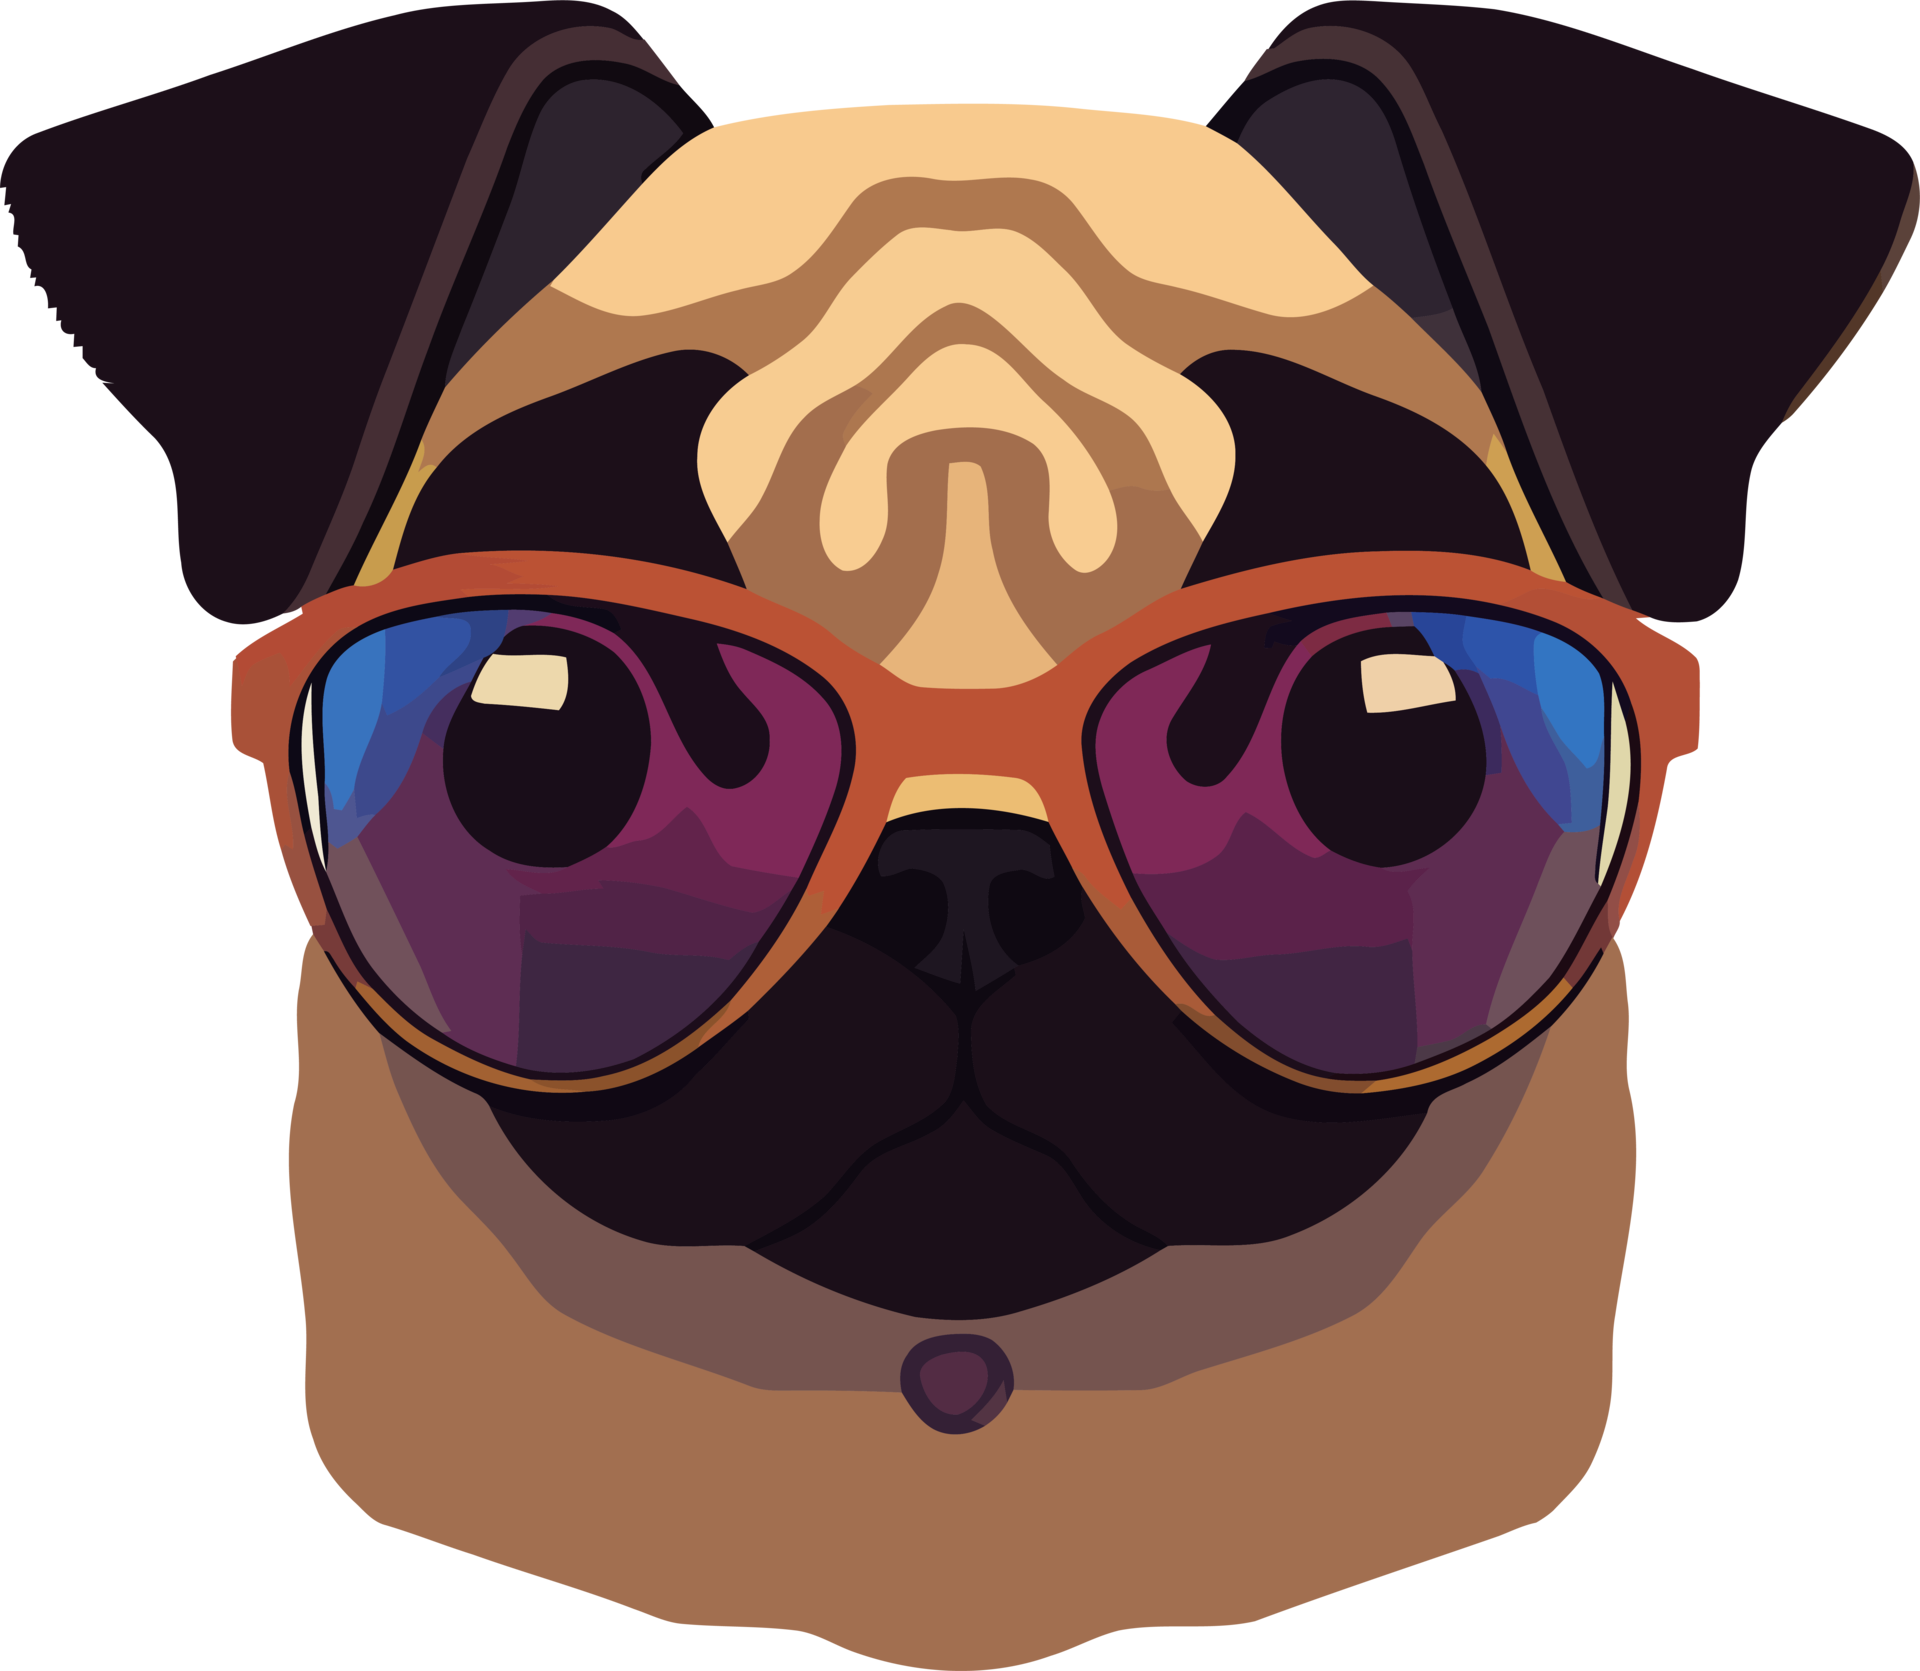 https://static.vecteezy.com/system/resources/previews/014/340/242/original/illustration-graphic-of-pug-wearing-sunglasses-isolated-good-for-logo-icon-mascot-print-or-customize-your-design-png.png